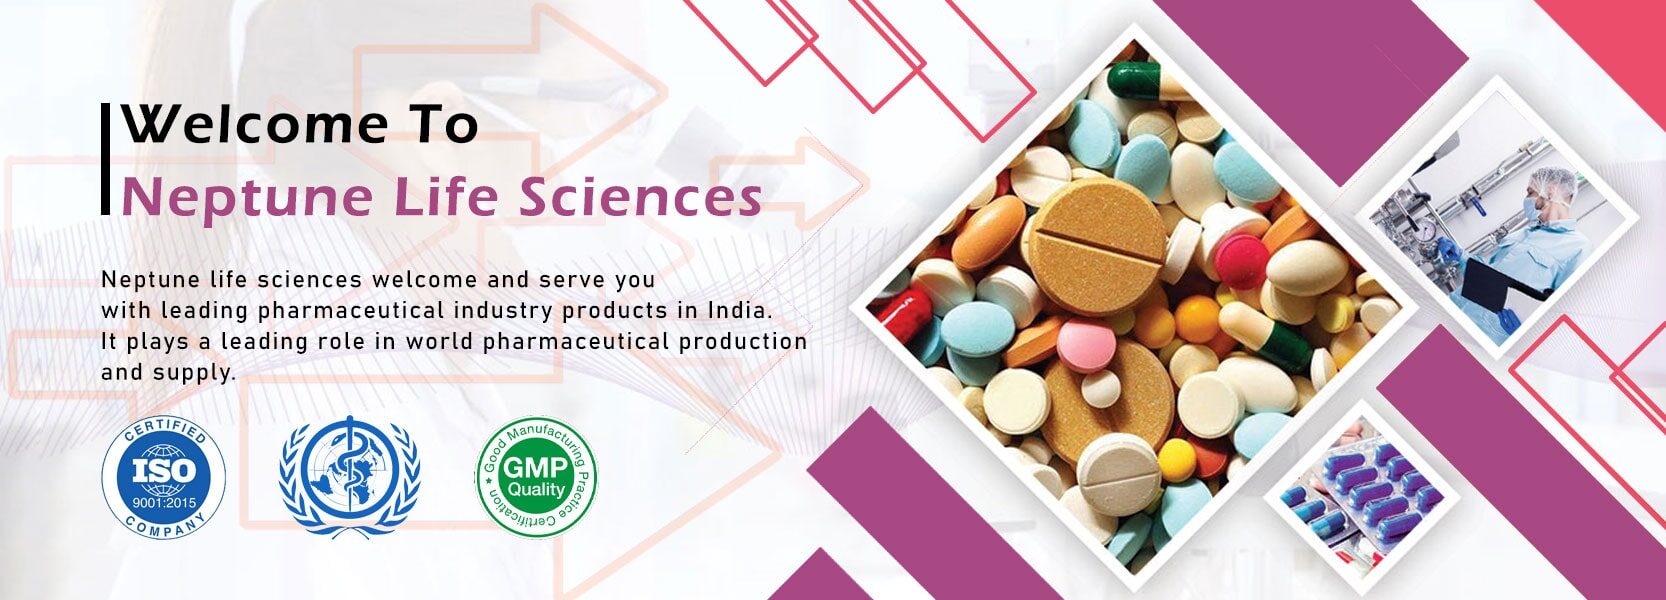 Top Pharma Contract Manufacturing Company in India